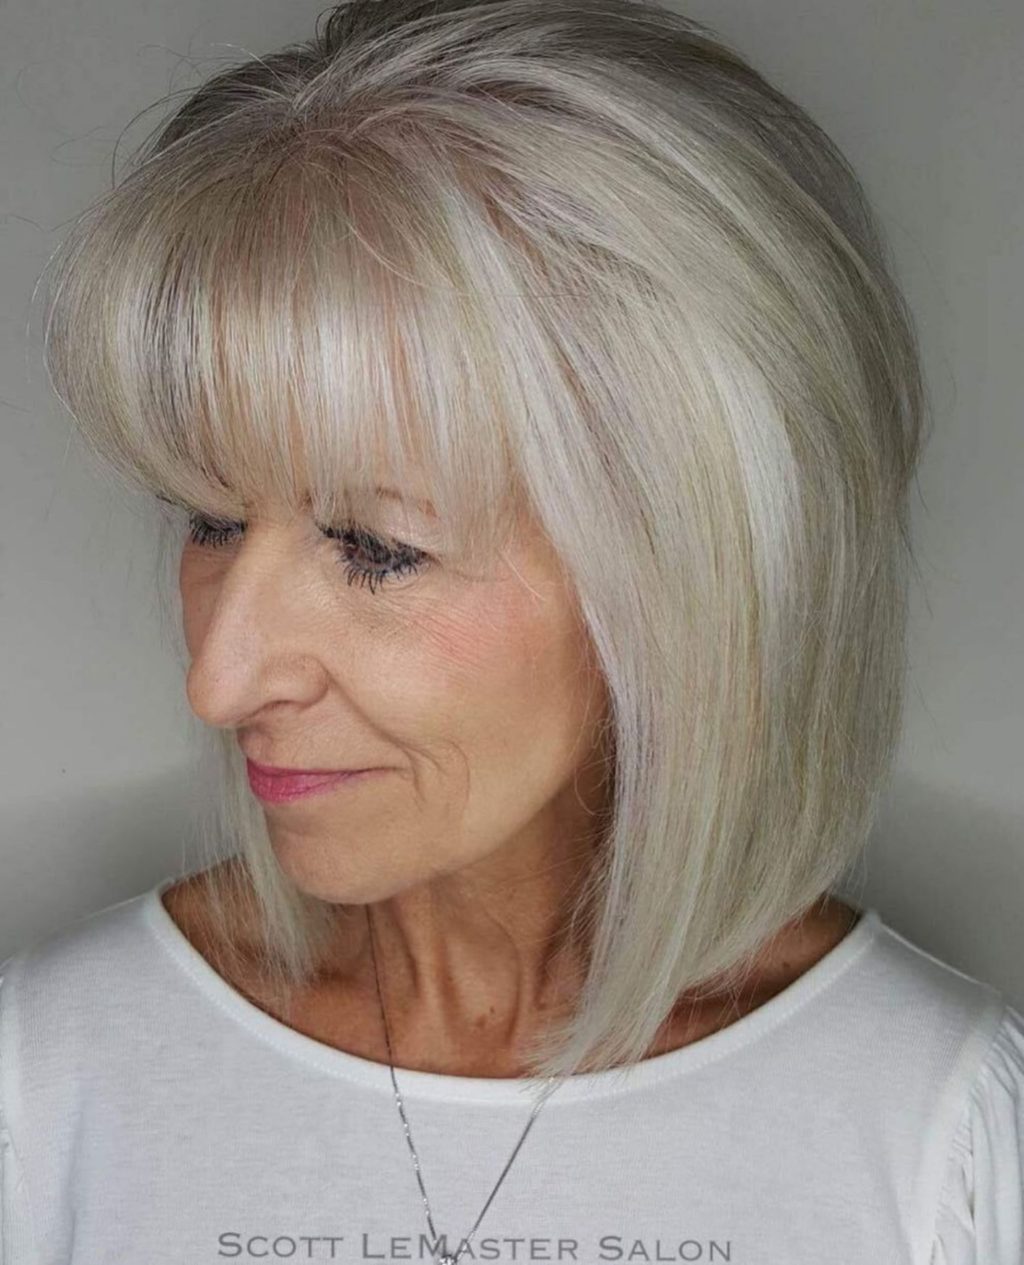 Best 12 Hairstyles For Women Over 60 To Look Younger